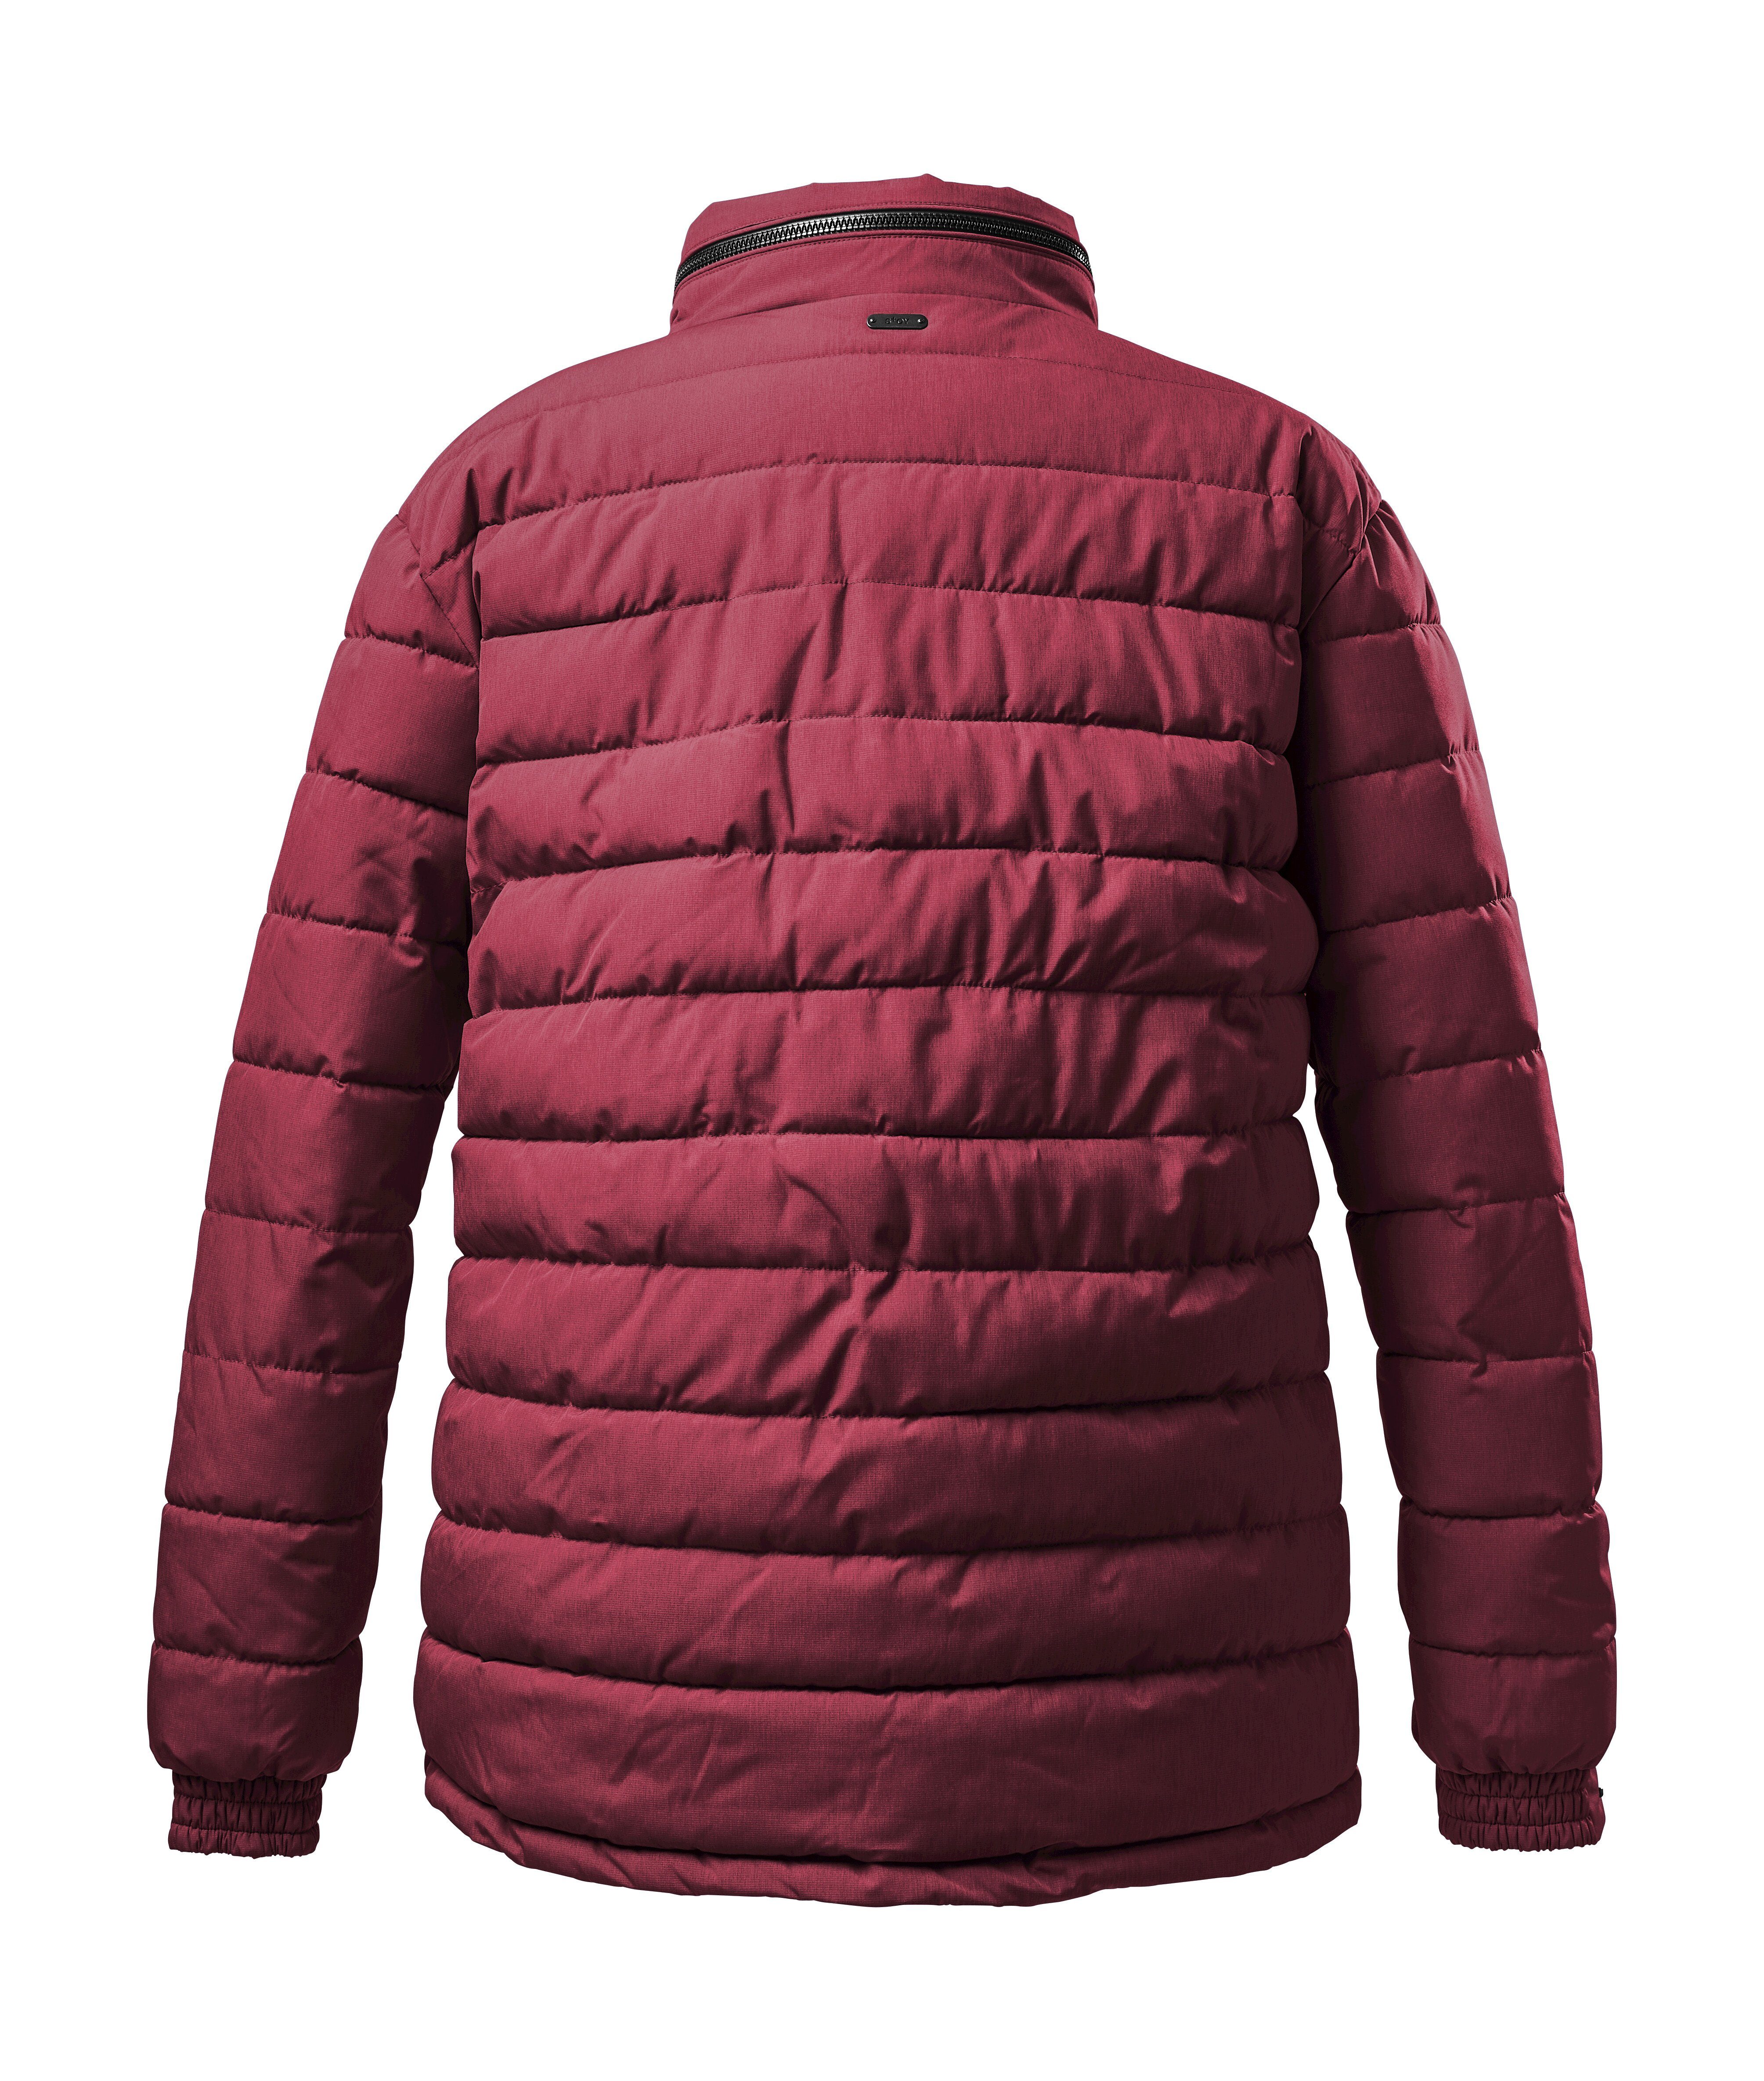 MN Steppjacke STOY Quilted A JCKT rot